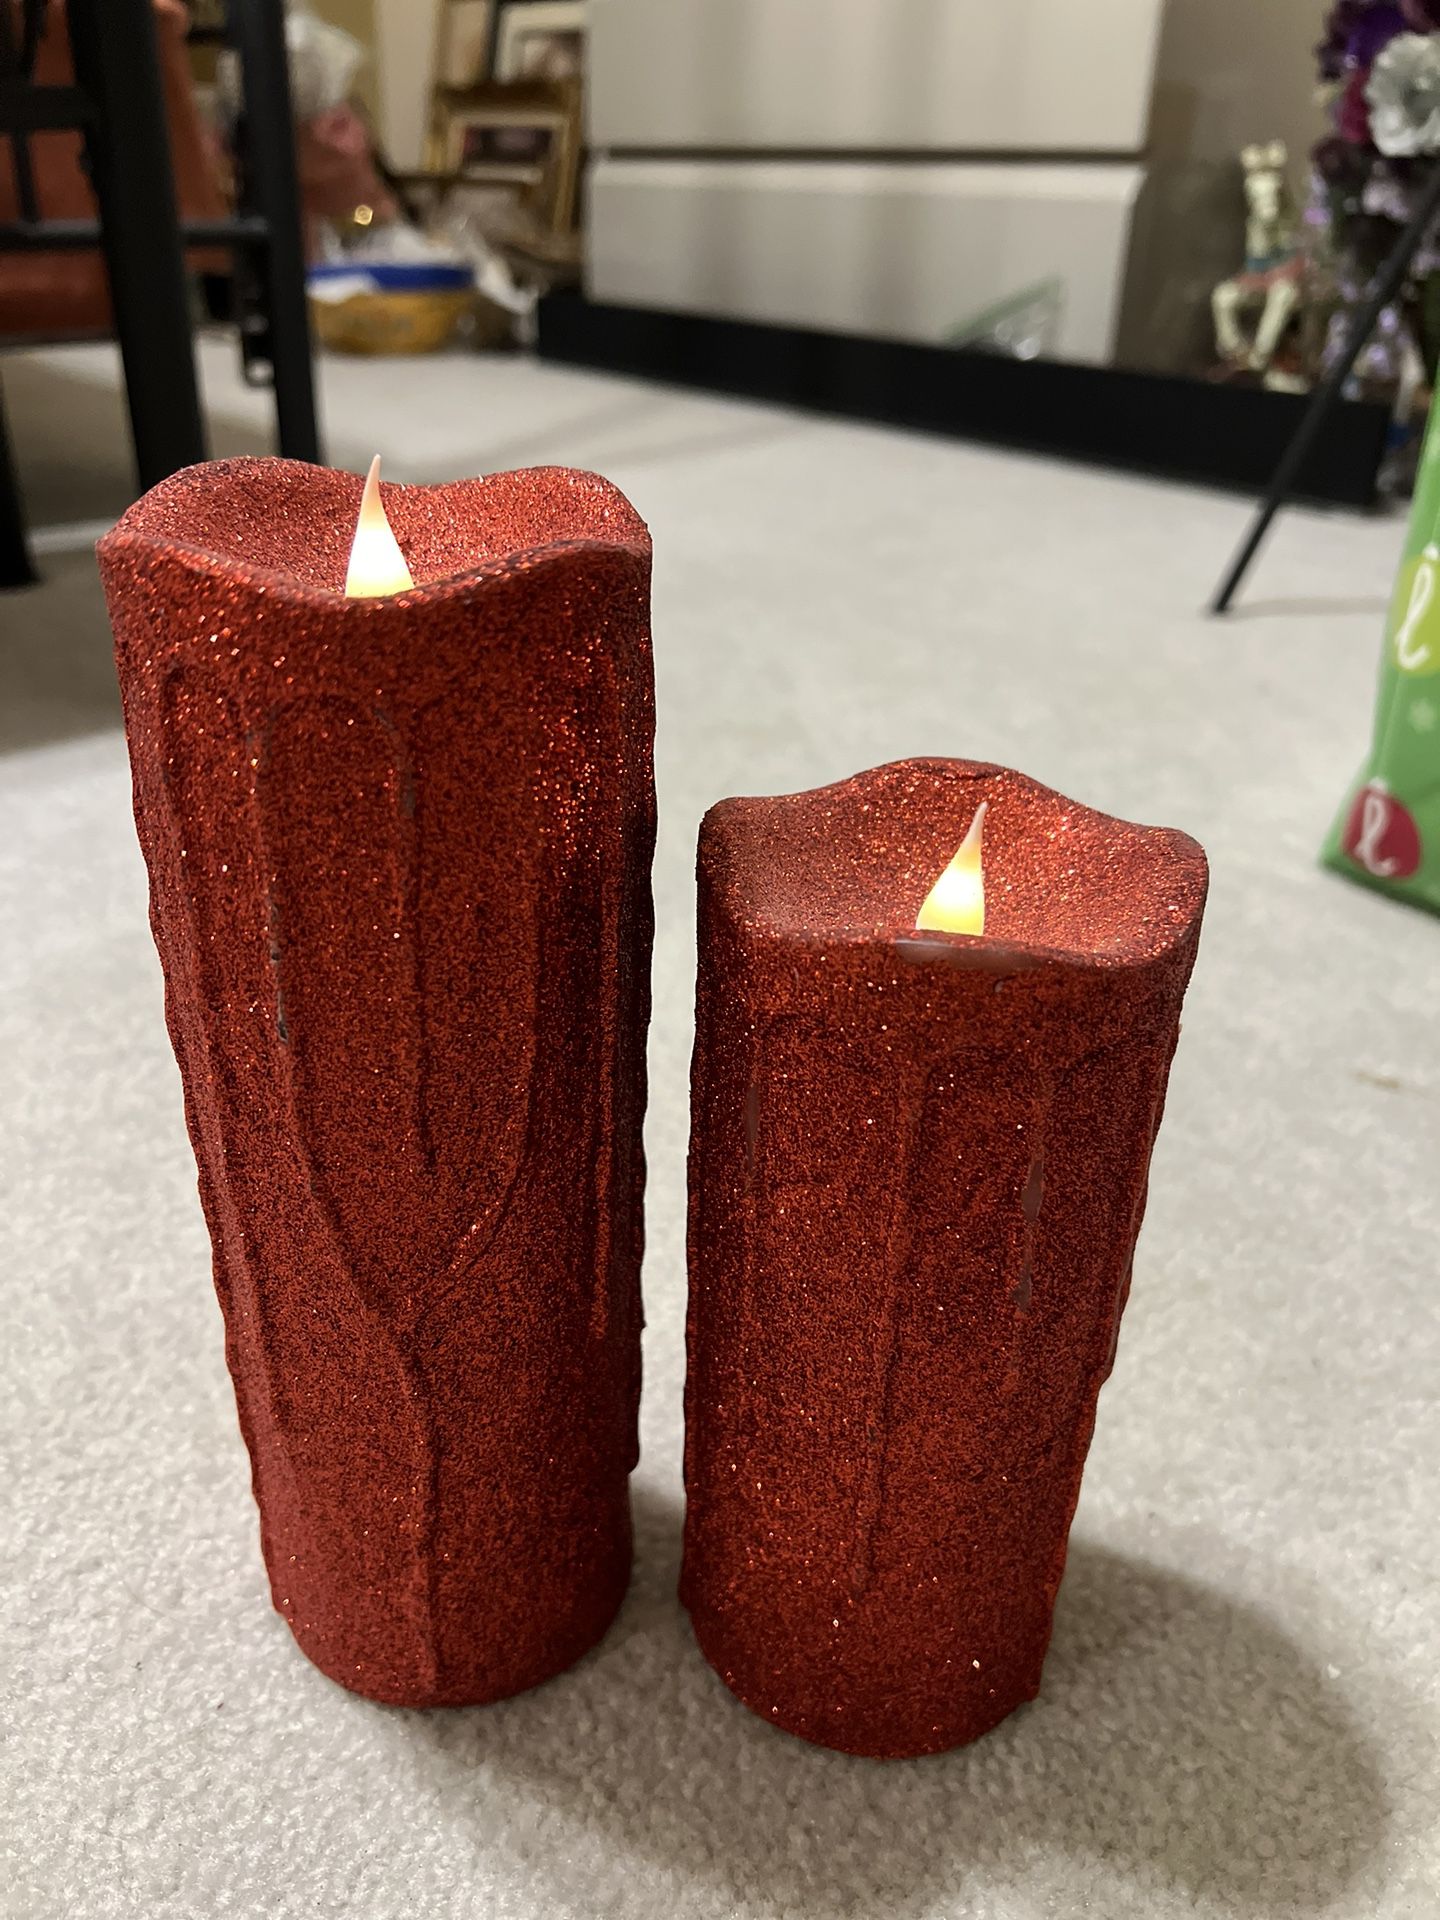 Red Flameless Candles (Battery Operated) 